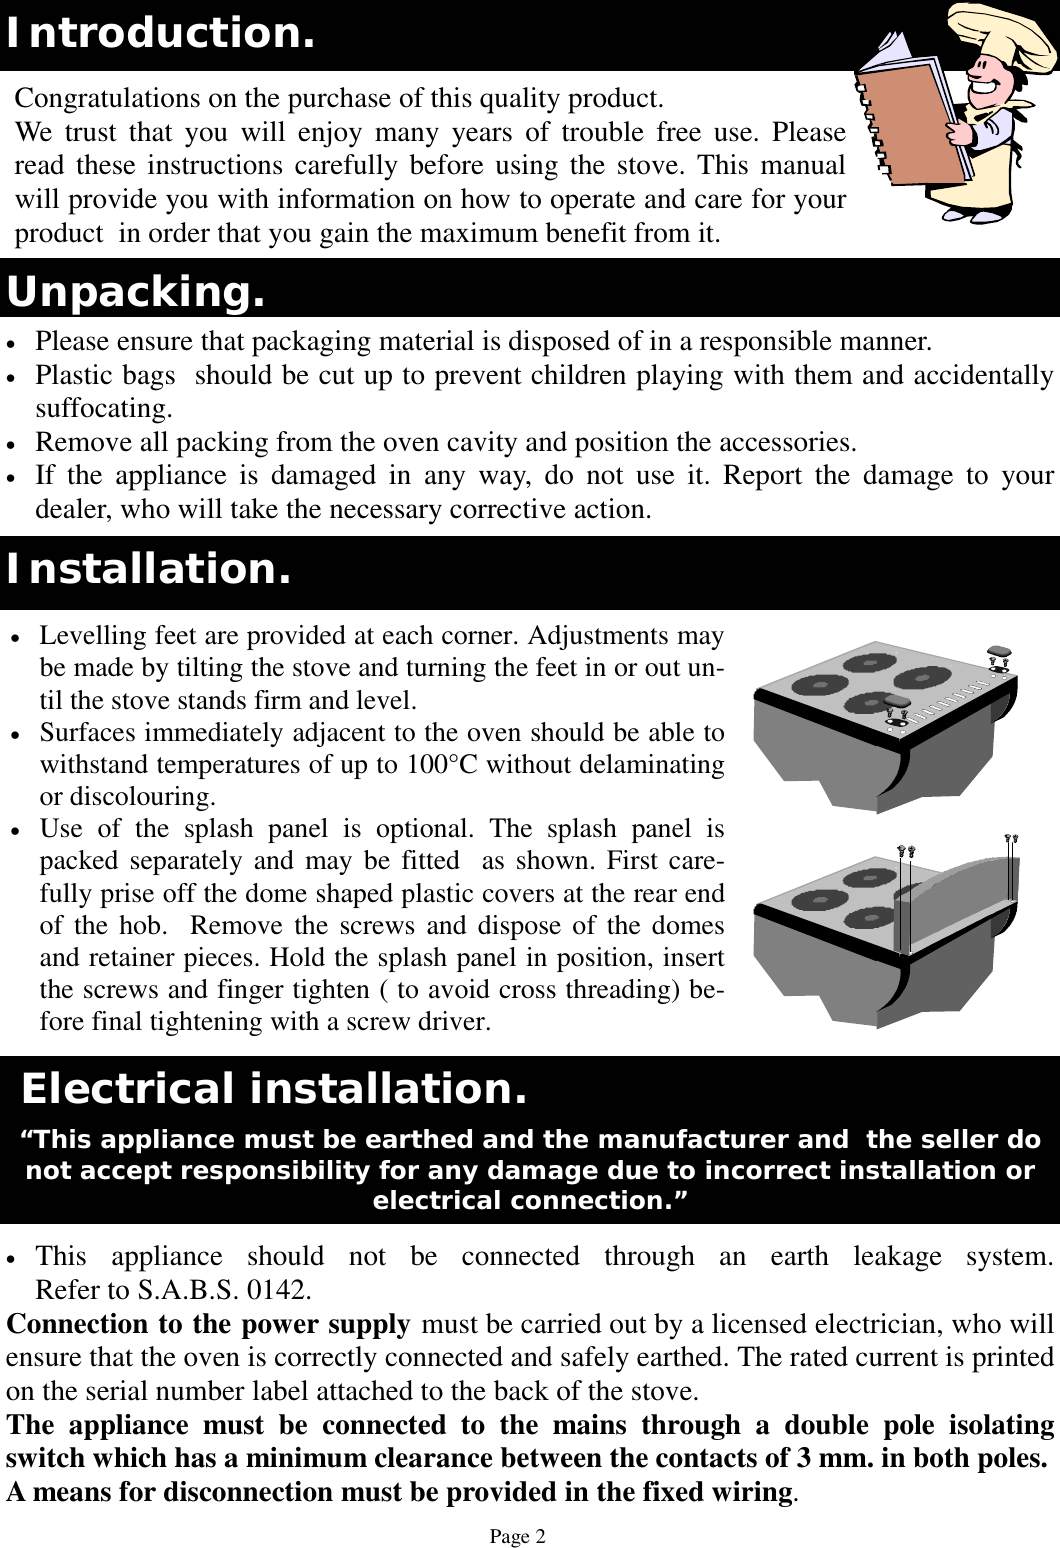 Page 2 of 12 - Defy Defy-Kitchenmaster--In-Sb-Users-Manual- 065 553  In Kitchemaster 2006 2YW Defy-kitchenmaster--in-sb-users-manual